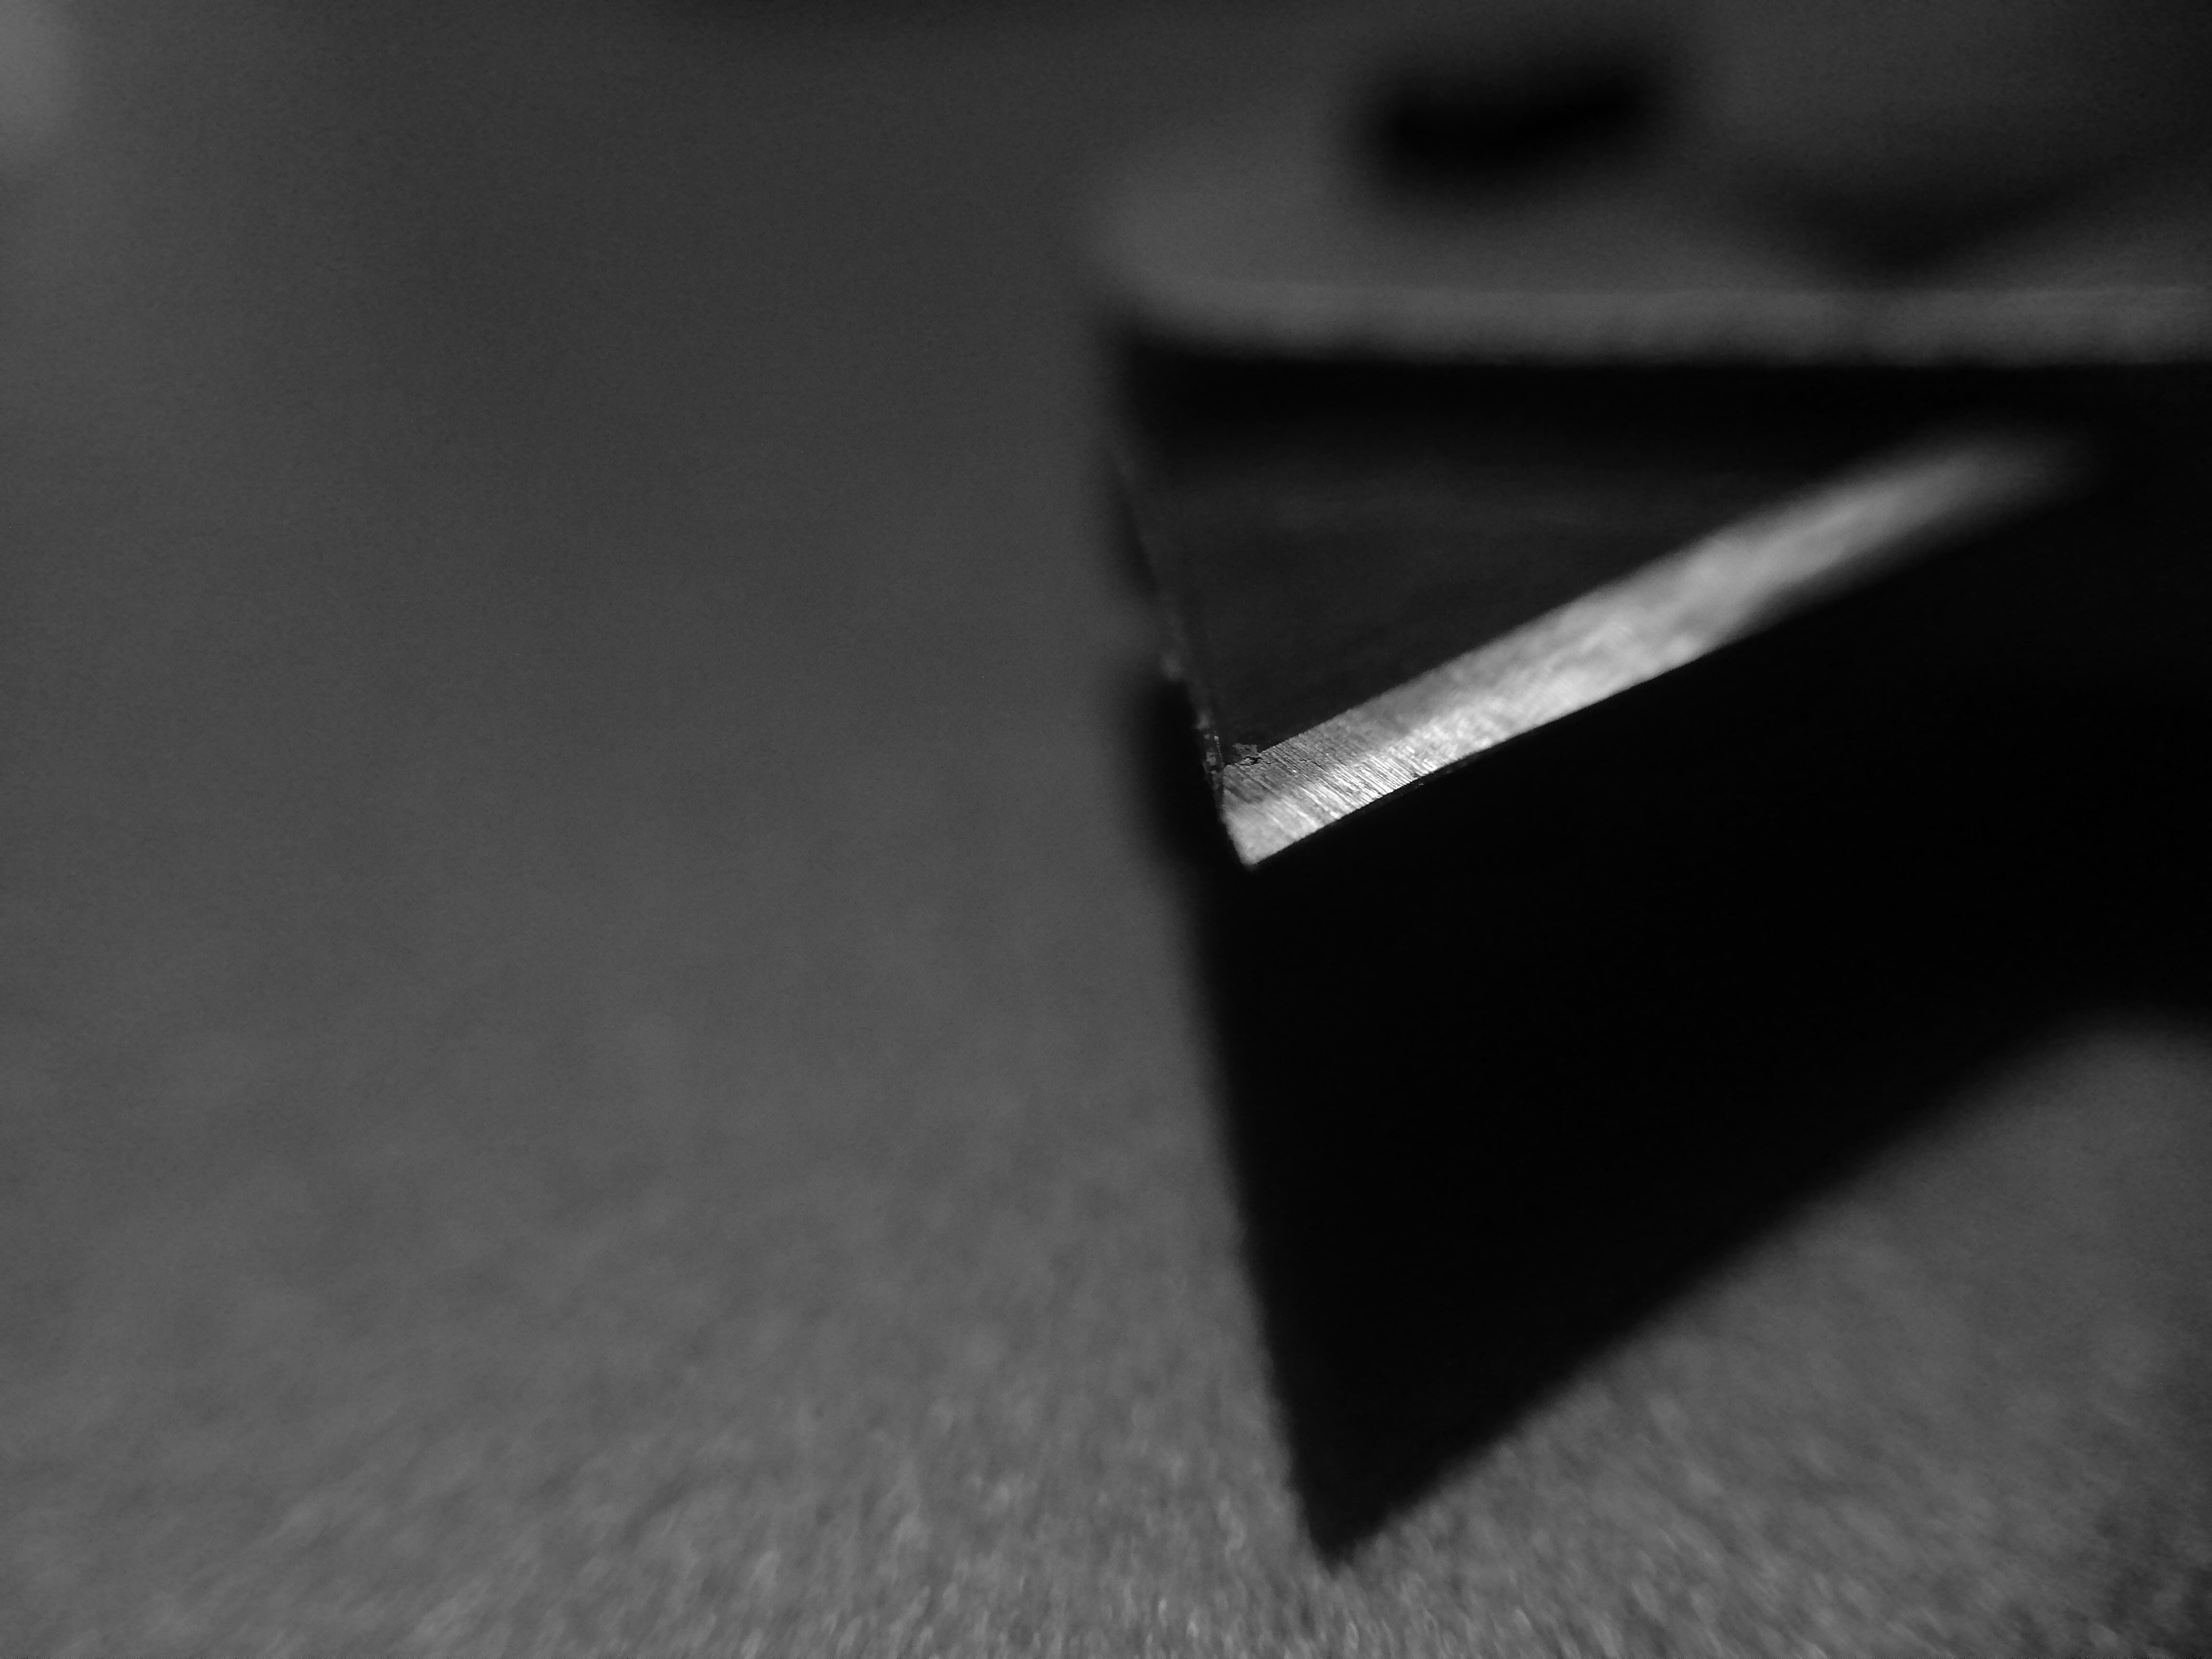 This is a black and white macro shot of a box-cutters blade